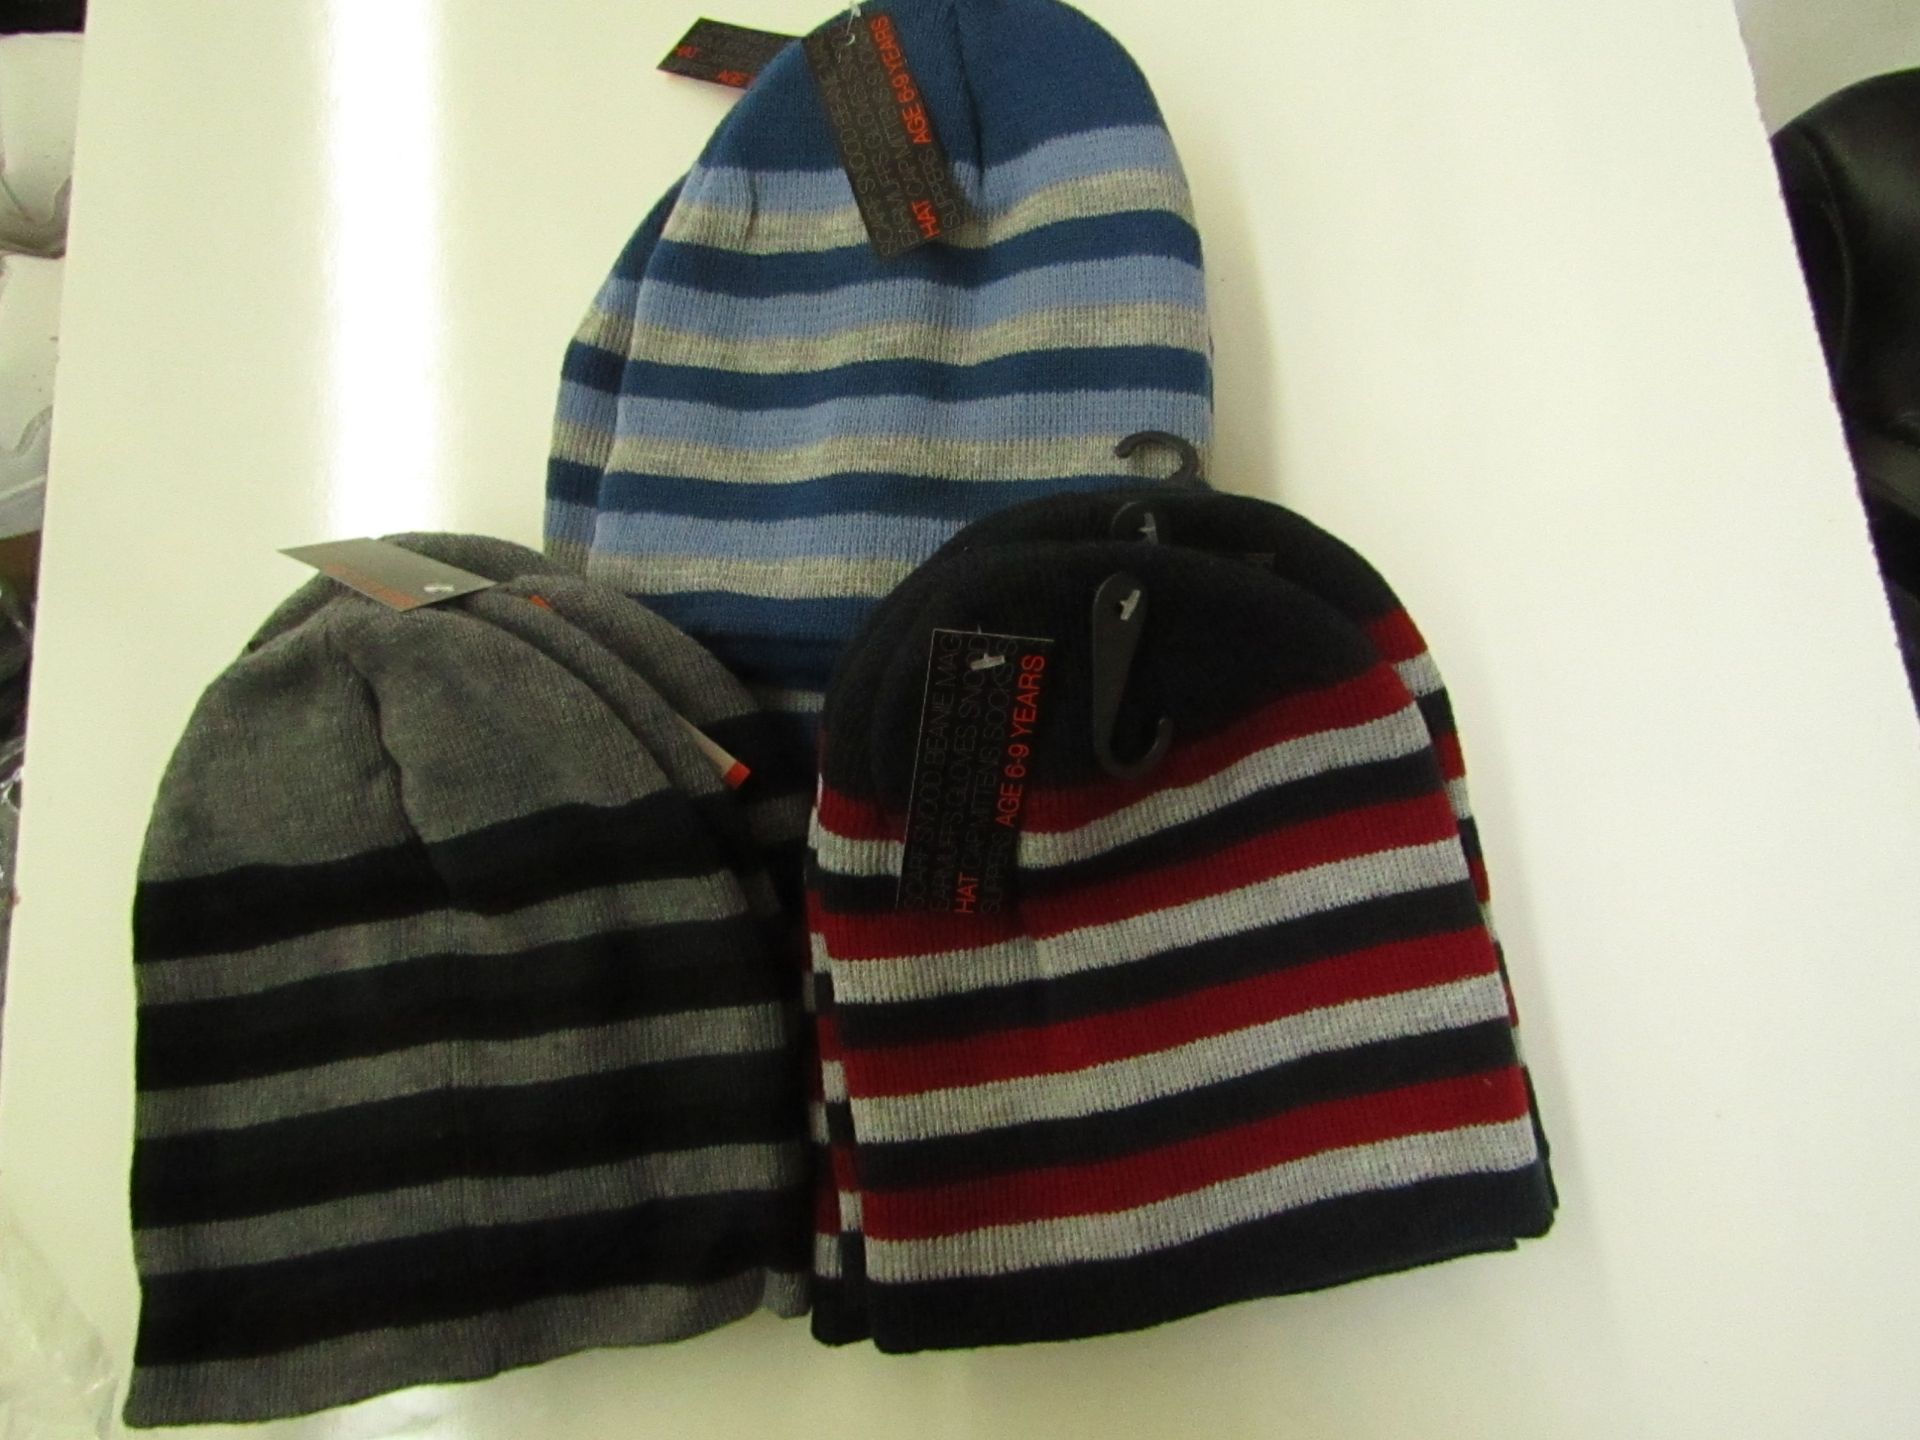 12 X Beannie Hats Striped Aged 10-13 yrs New & Packaged